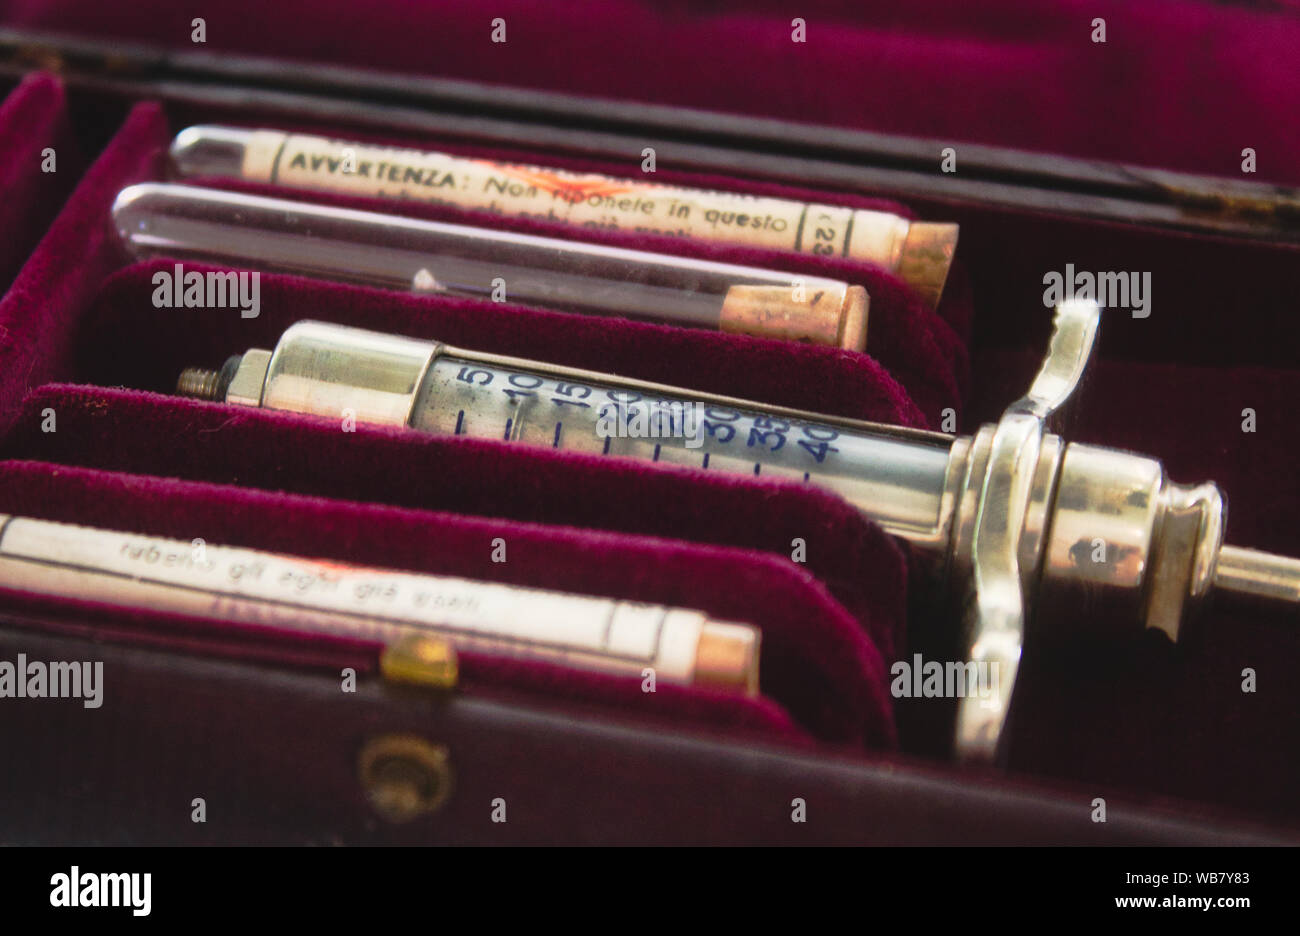 Old-fashioned syringe in a red case Stock Photo